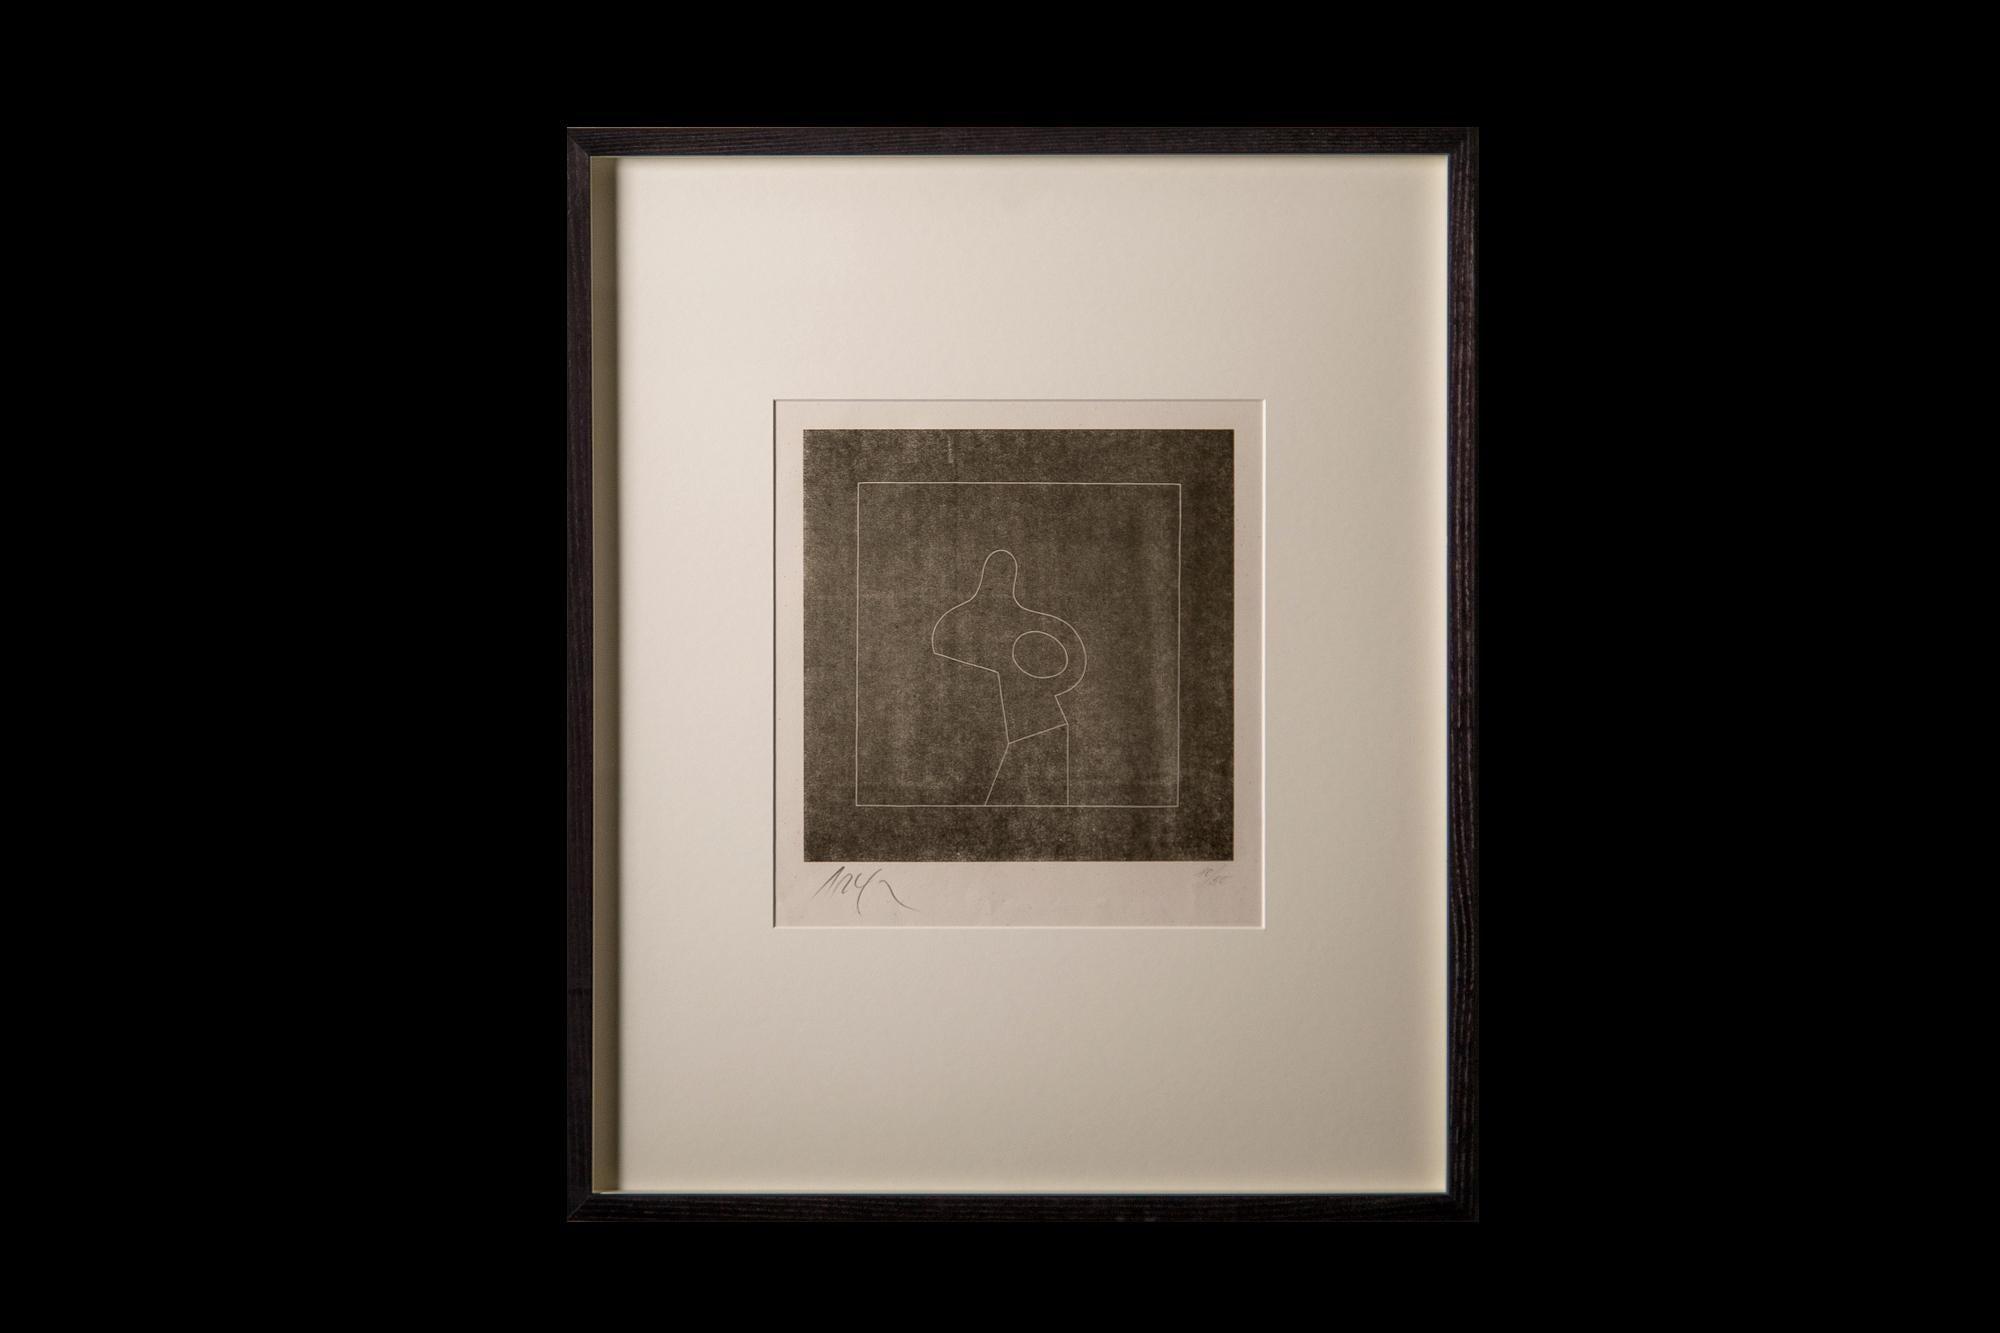 Hand signed and numbered 10/50 in pencil.

Presented in new high quality black ash box frame. 

About the artist:
Arp, a sculptor, poet, painter and printmaker, was a founding member of the international Dada movement, which arose in Europe